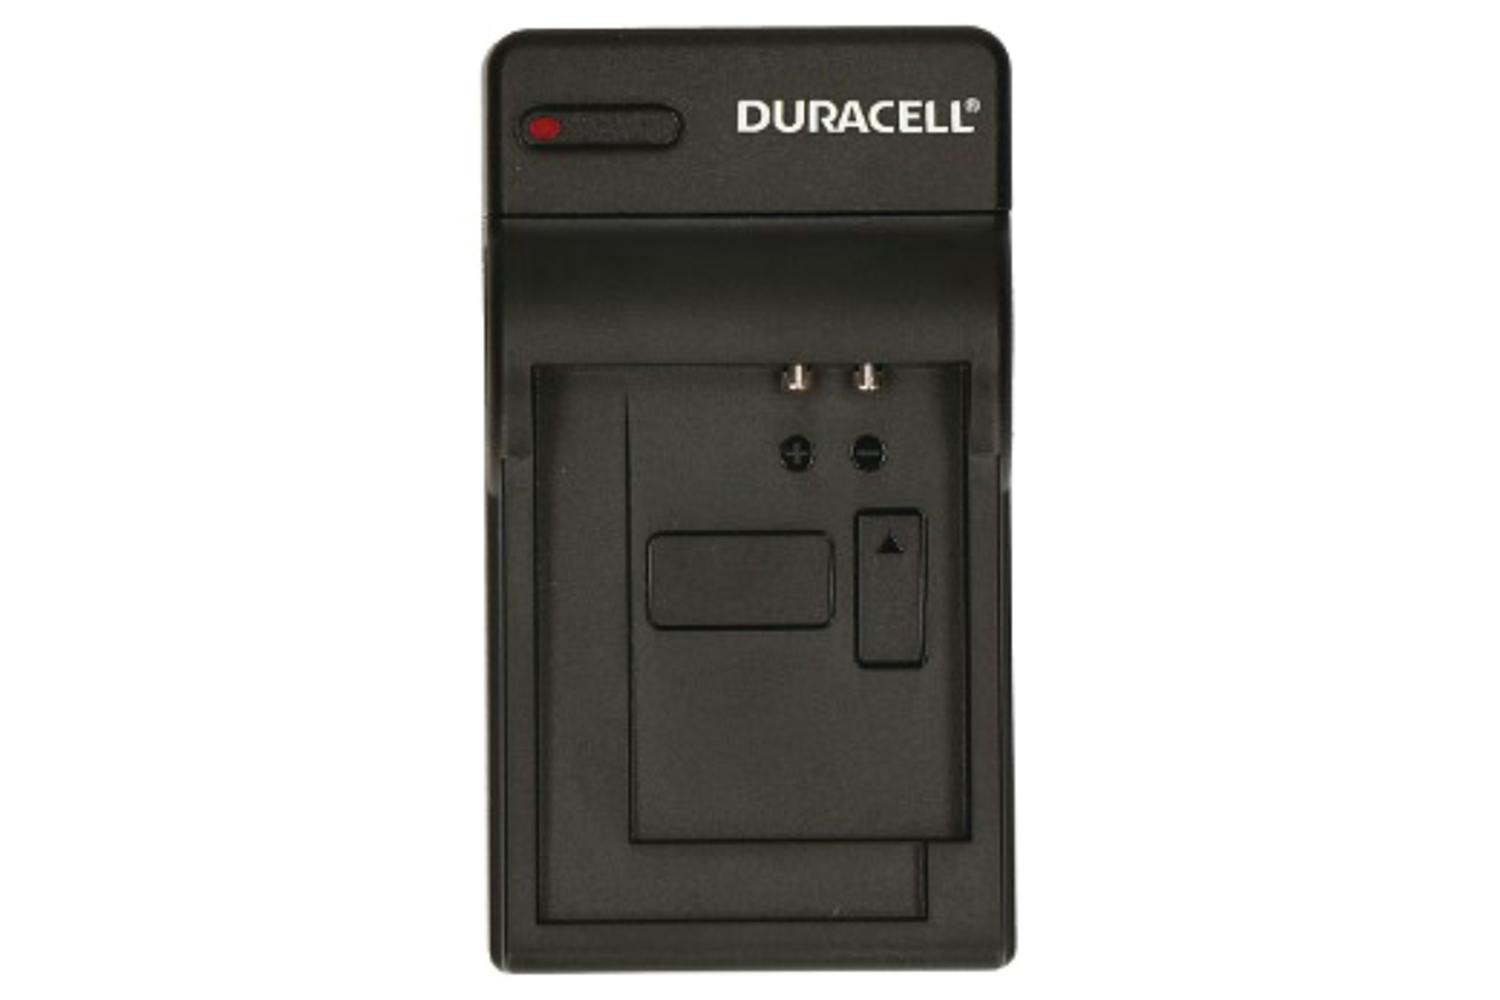 Duracell Replacement Panasonic DMW-BLD10E Charger